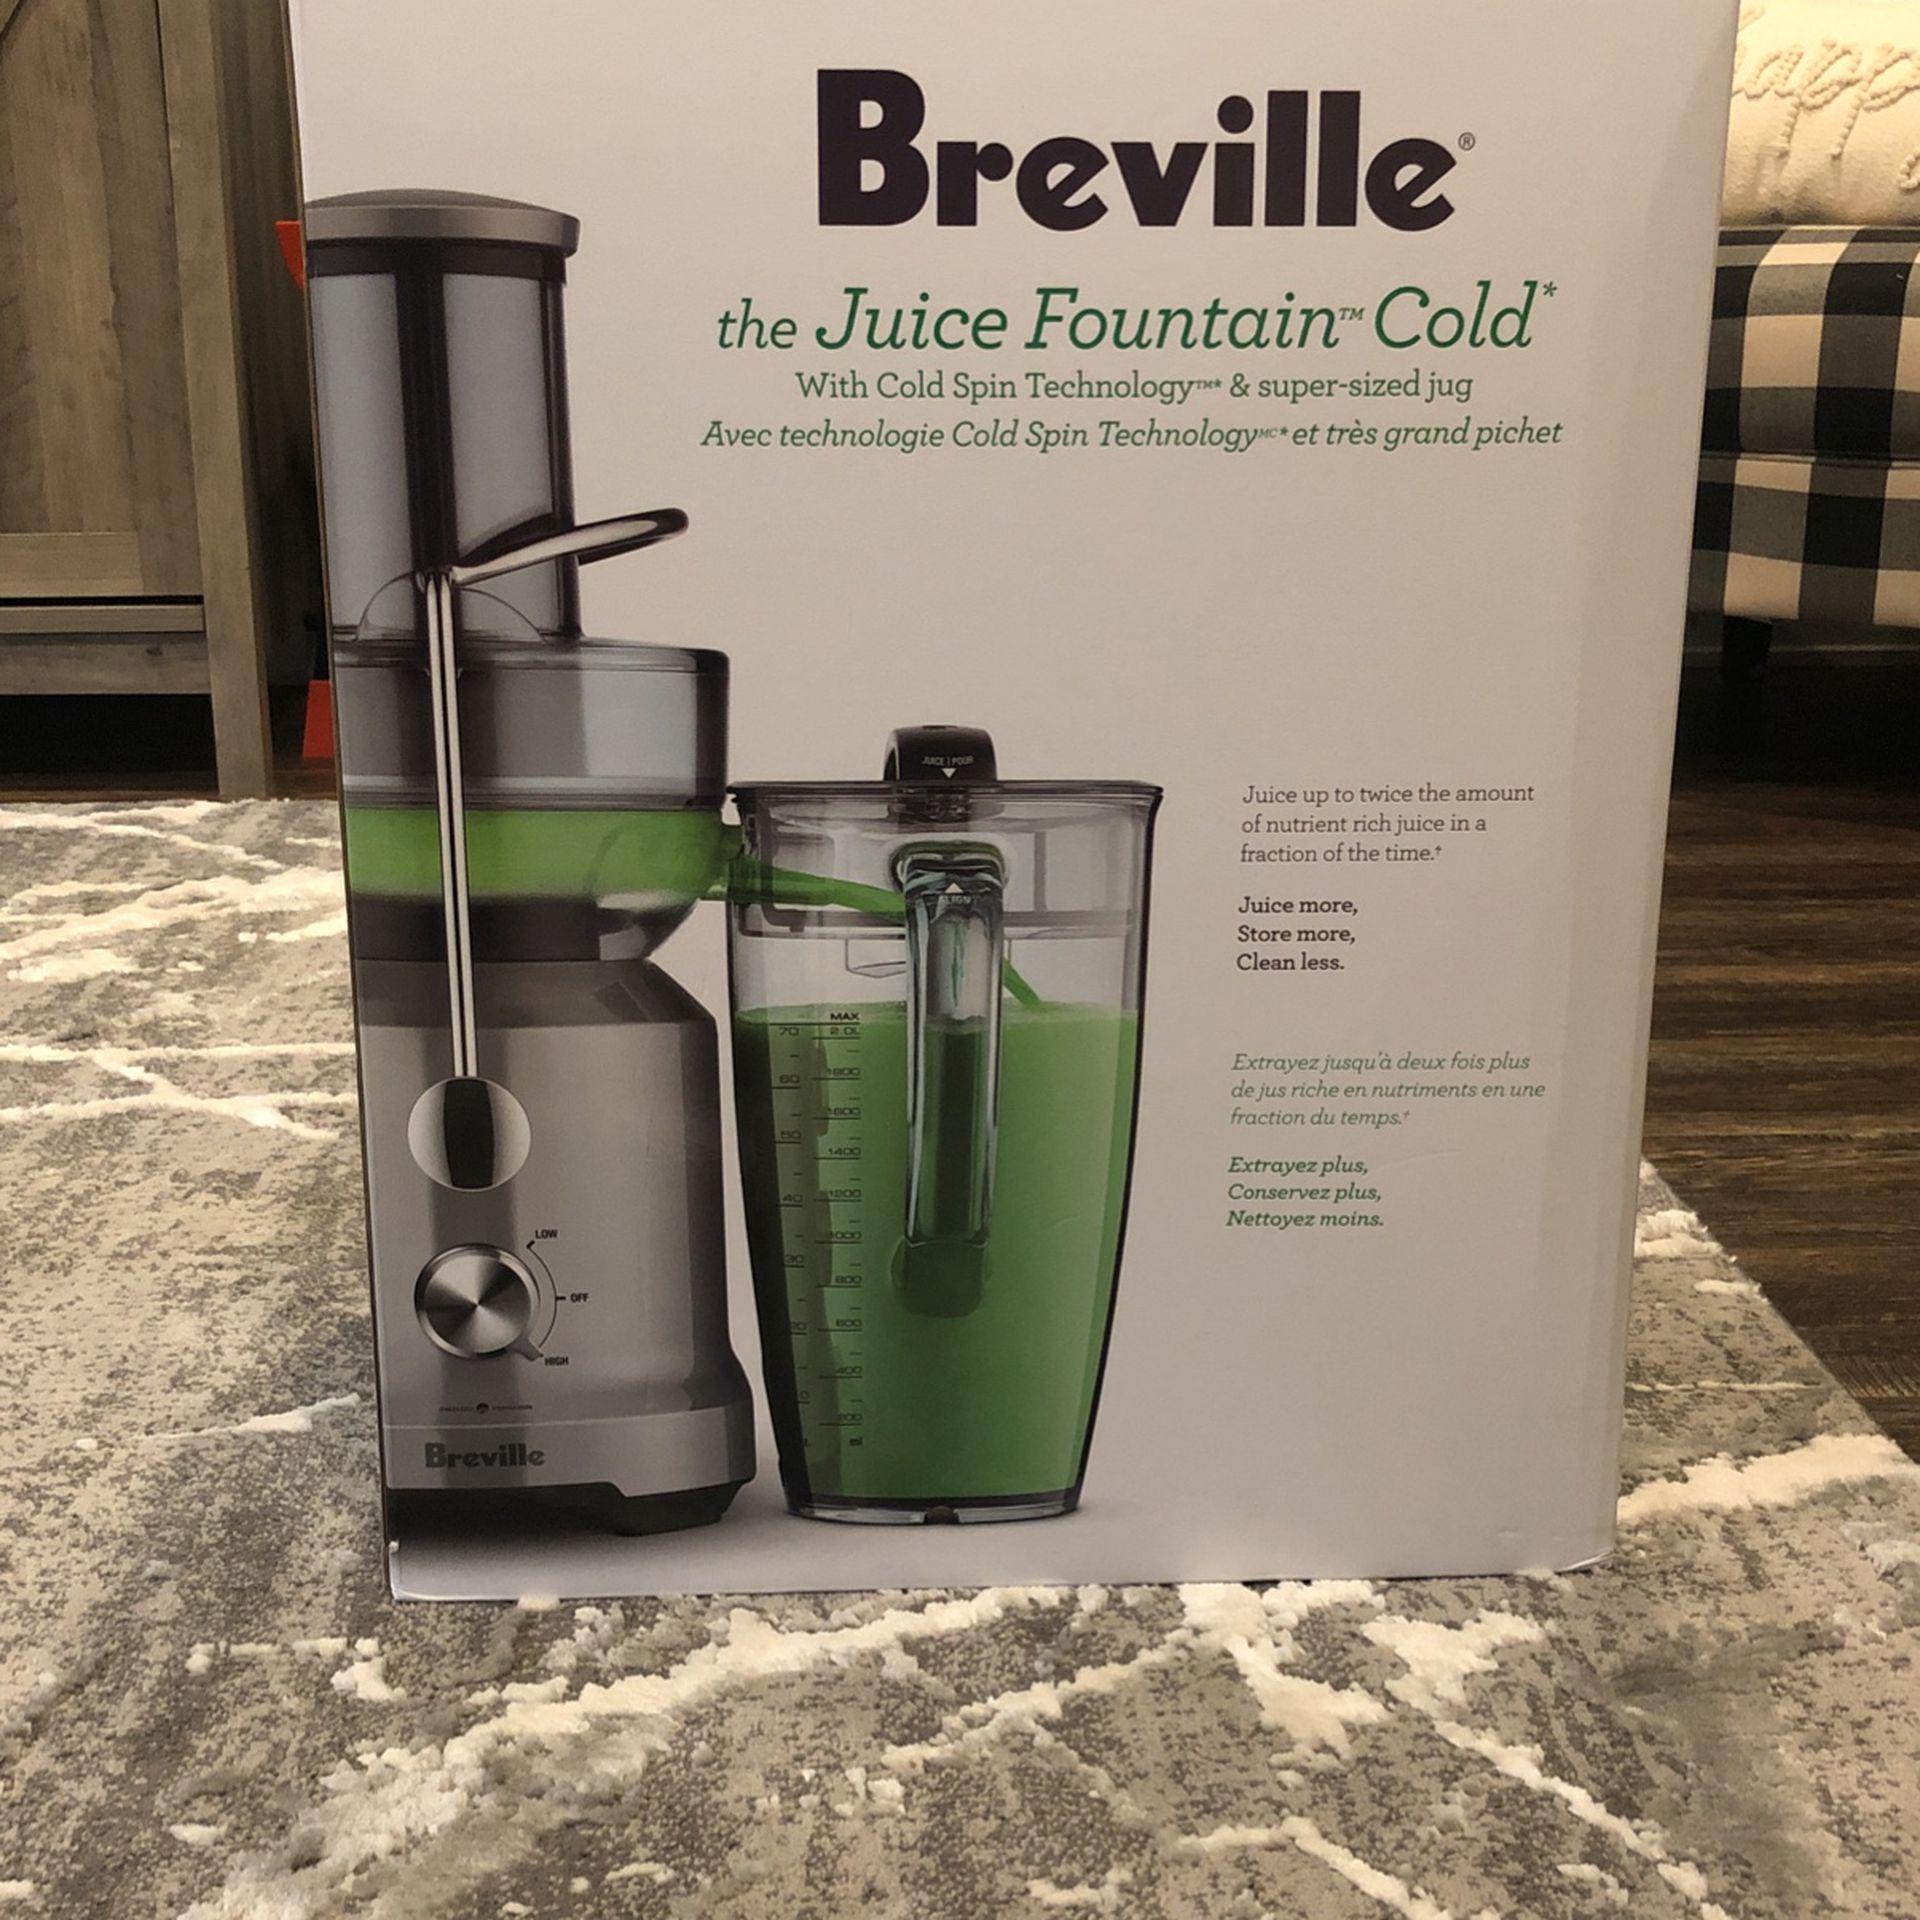 Juicer- Breville: The Juice Fountain Cold